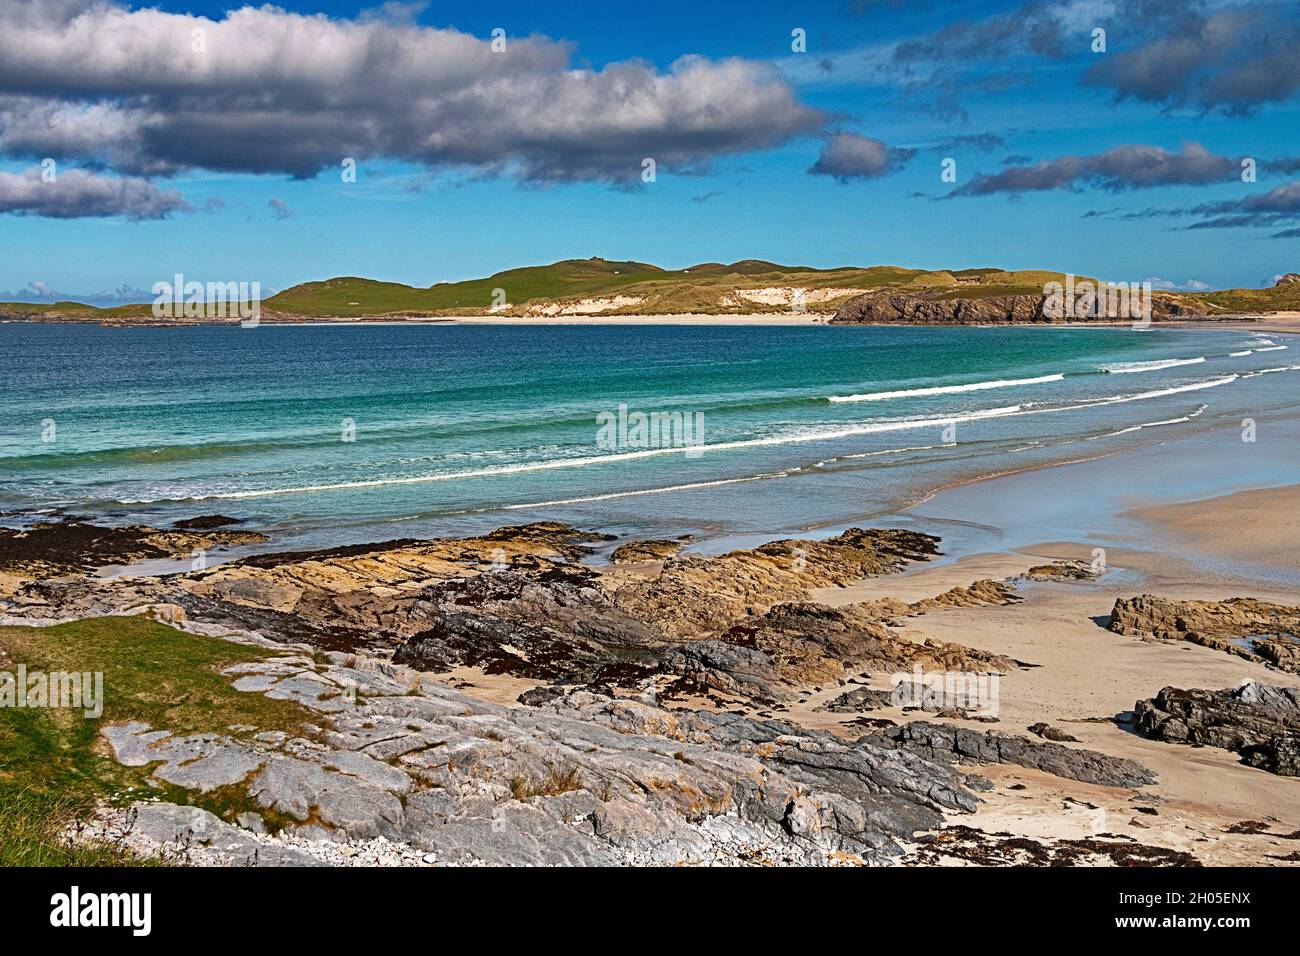 DURNESS SUTHERLAND SCOTLAND A SANDY BEACH ROCKS  A BLUE SKY AND A BLUE GREEN SEA IN LATE SUMMER Stock Photo